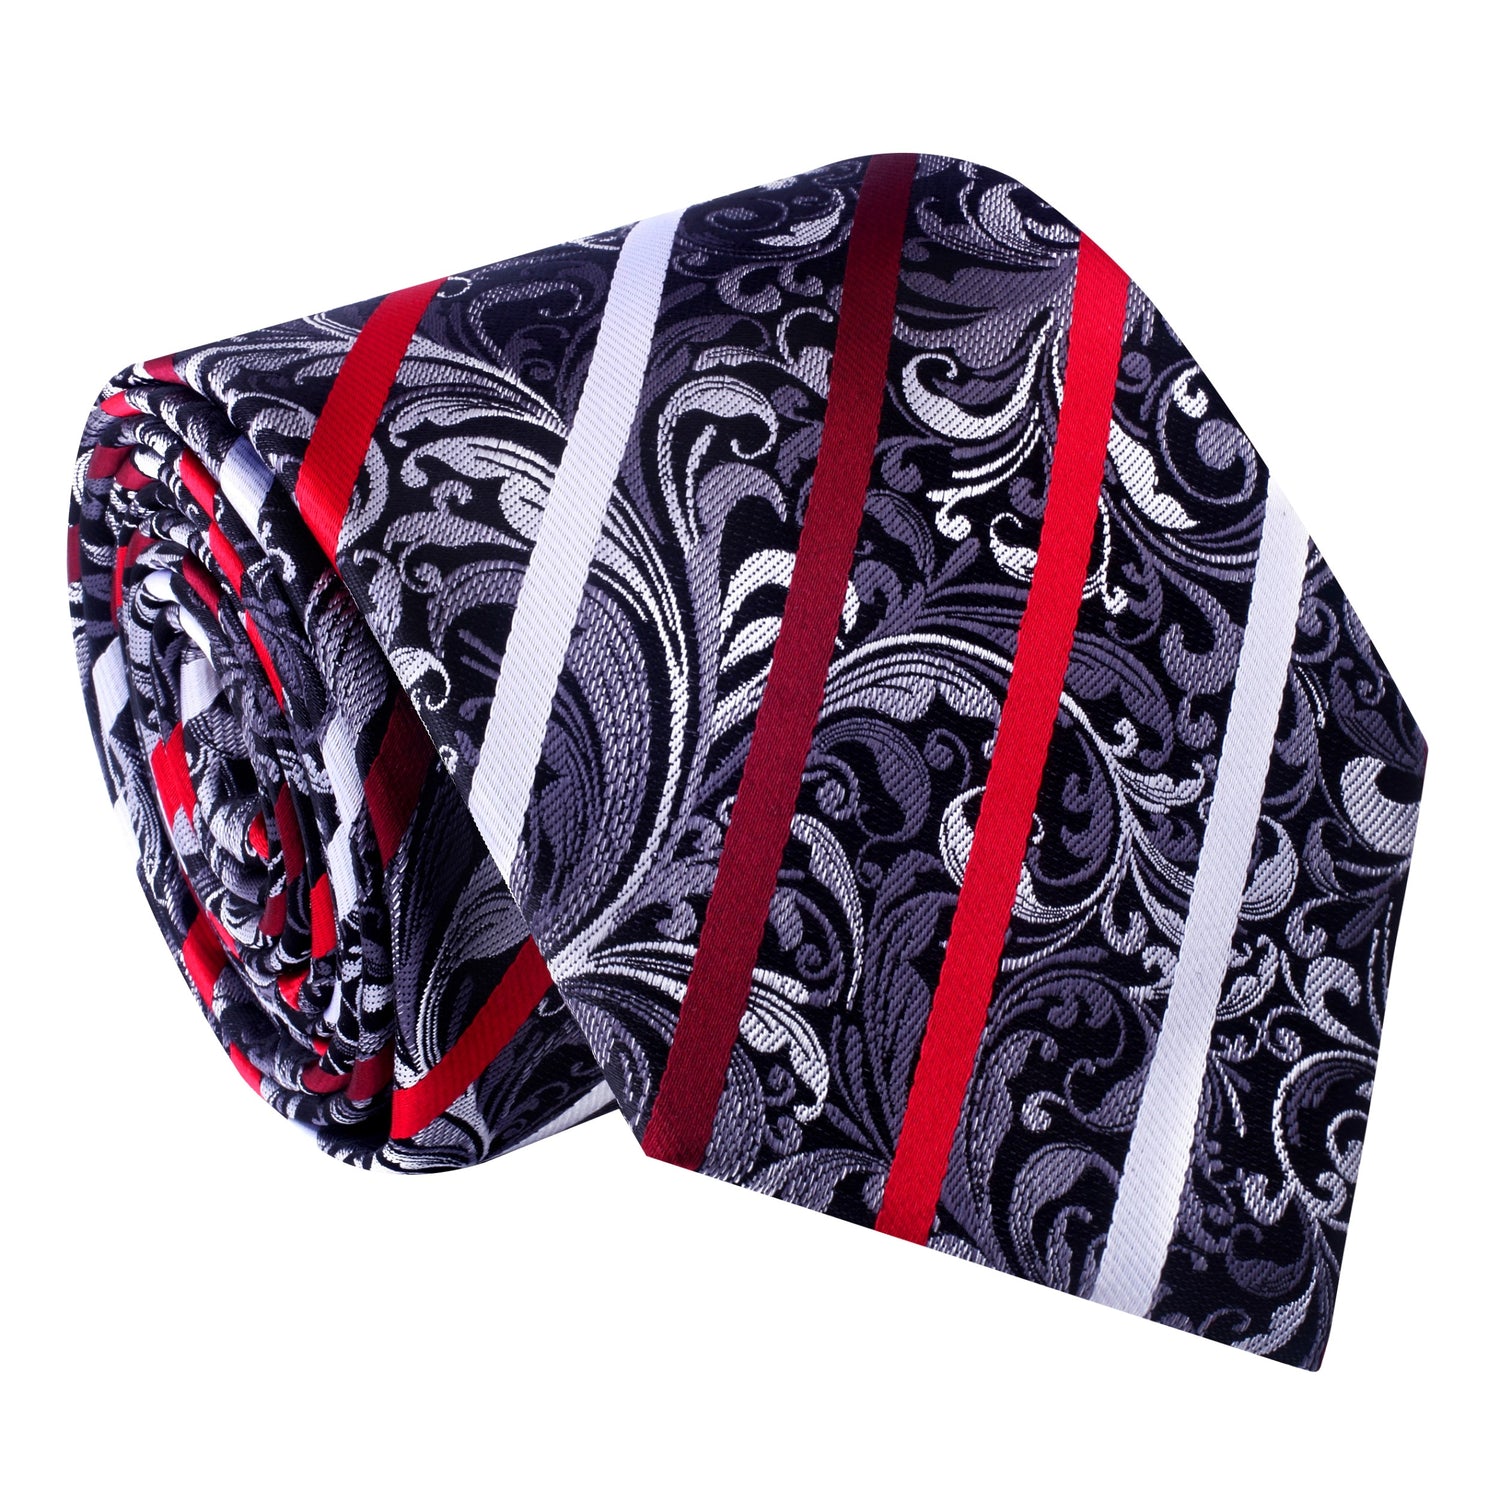 Grey, Black, White and Red Floral with Stripe Tie 